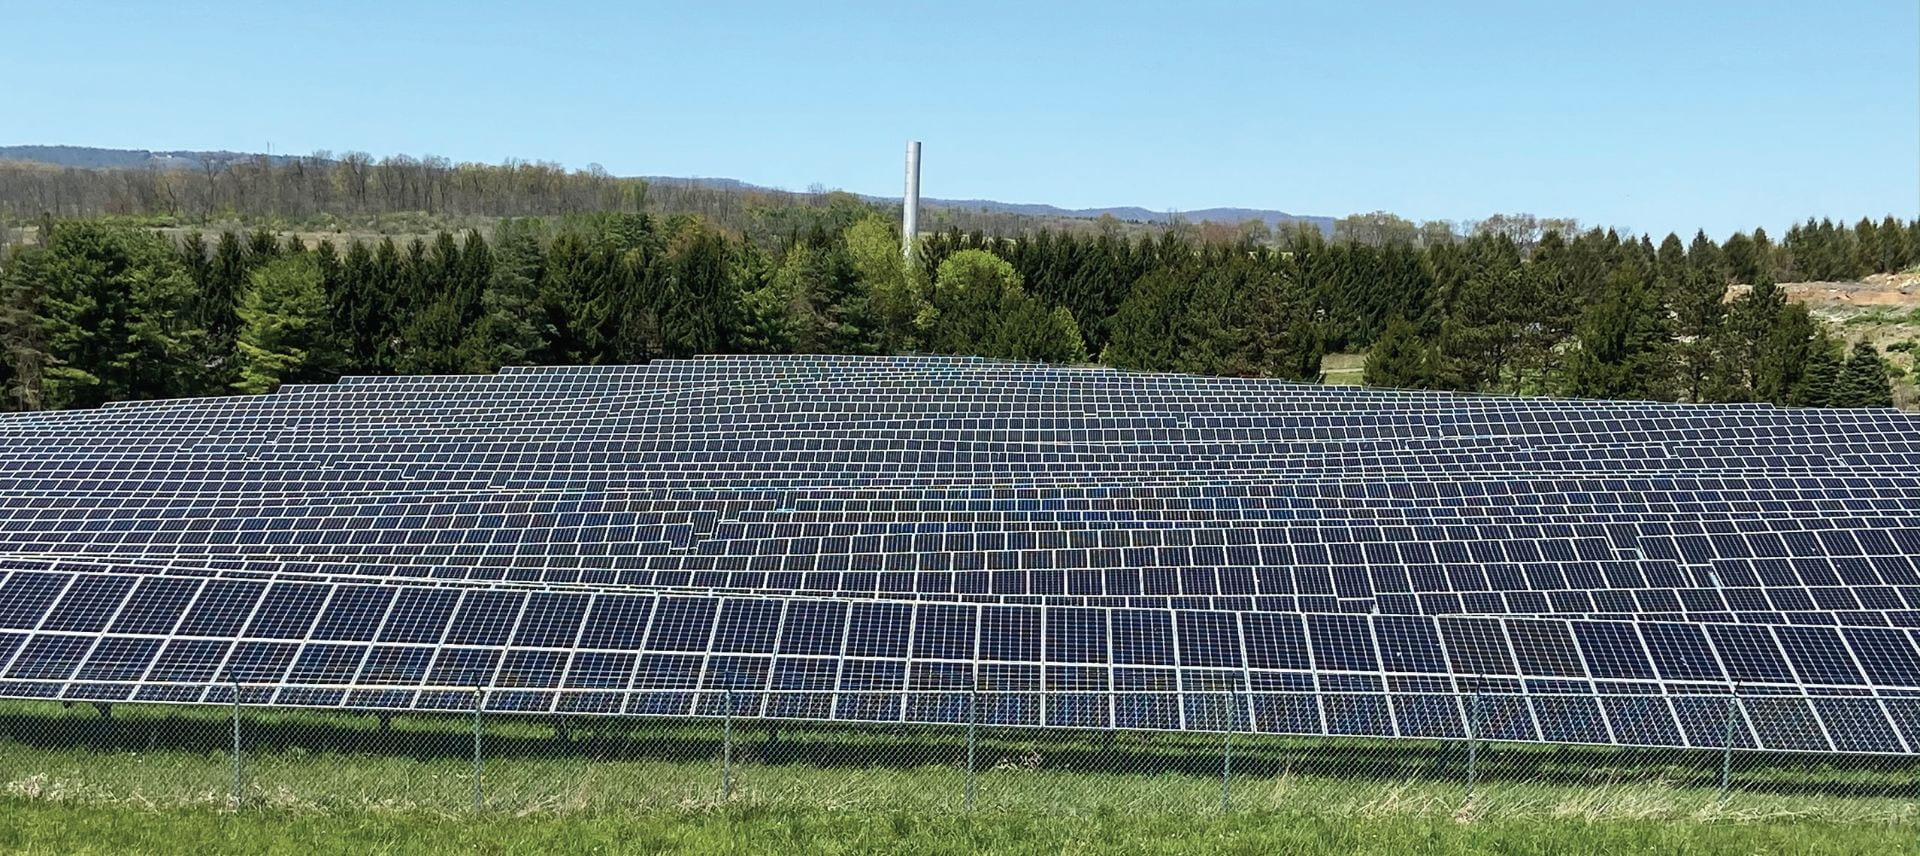 Landscape-level view of a large field covered with solar panels. Credit: Penn State MCOR